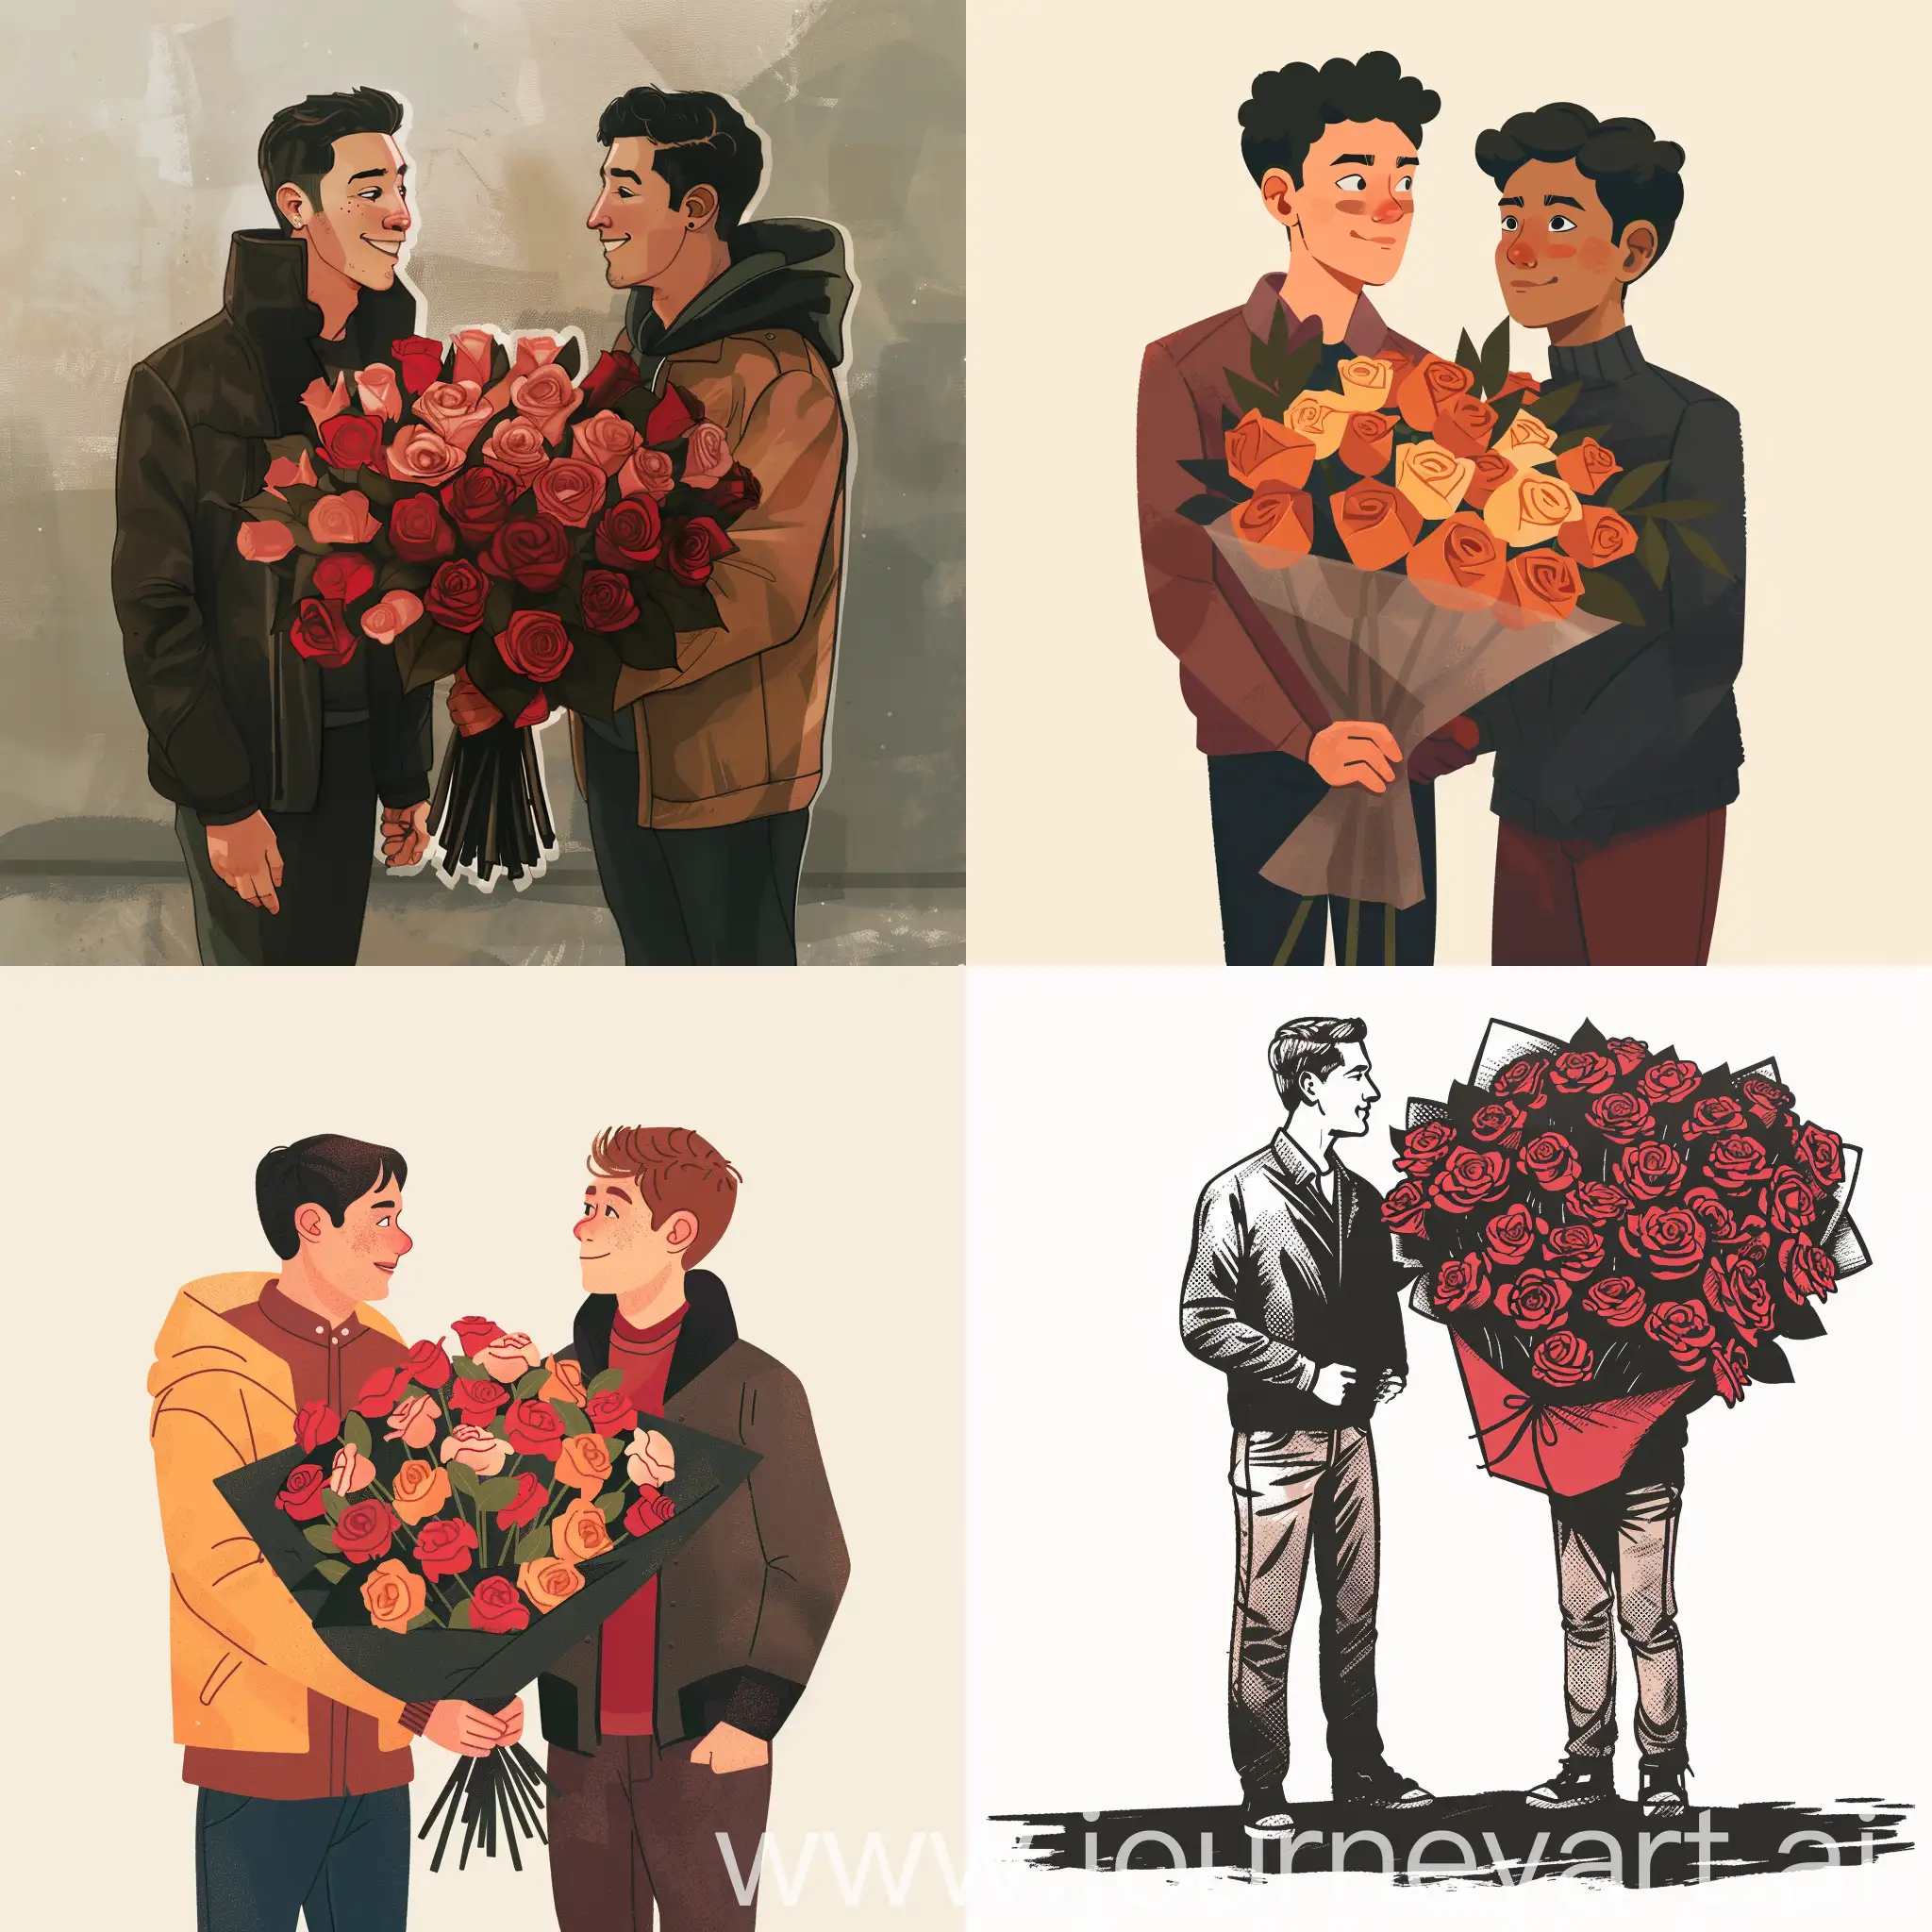 Romantic-Valentines-Day-Celebration-with-Two-Men-and-a-Bouquet-of-Roses